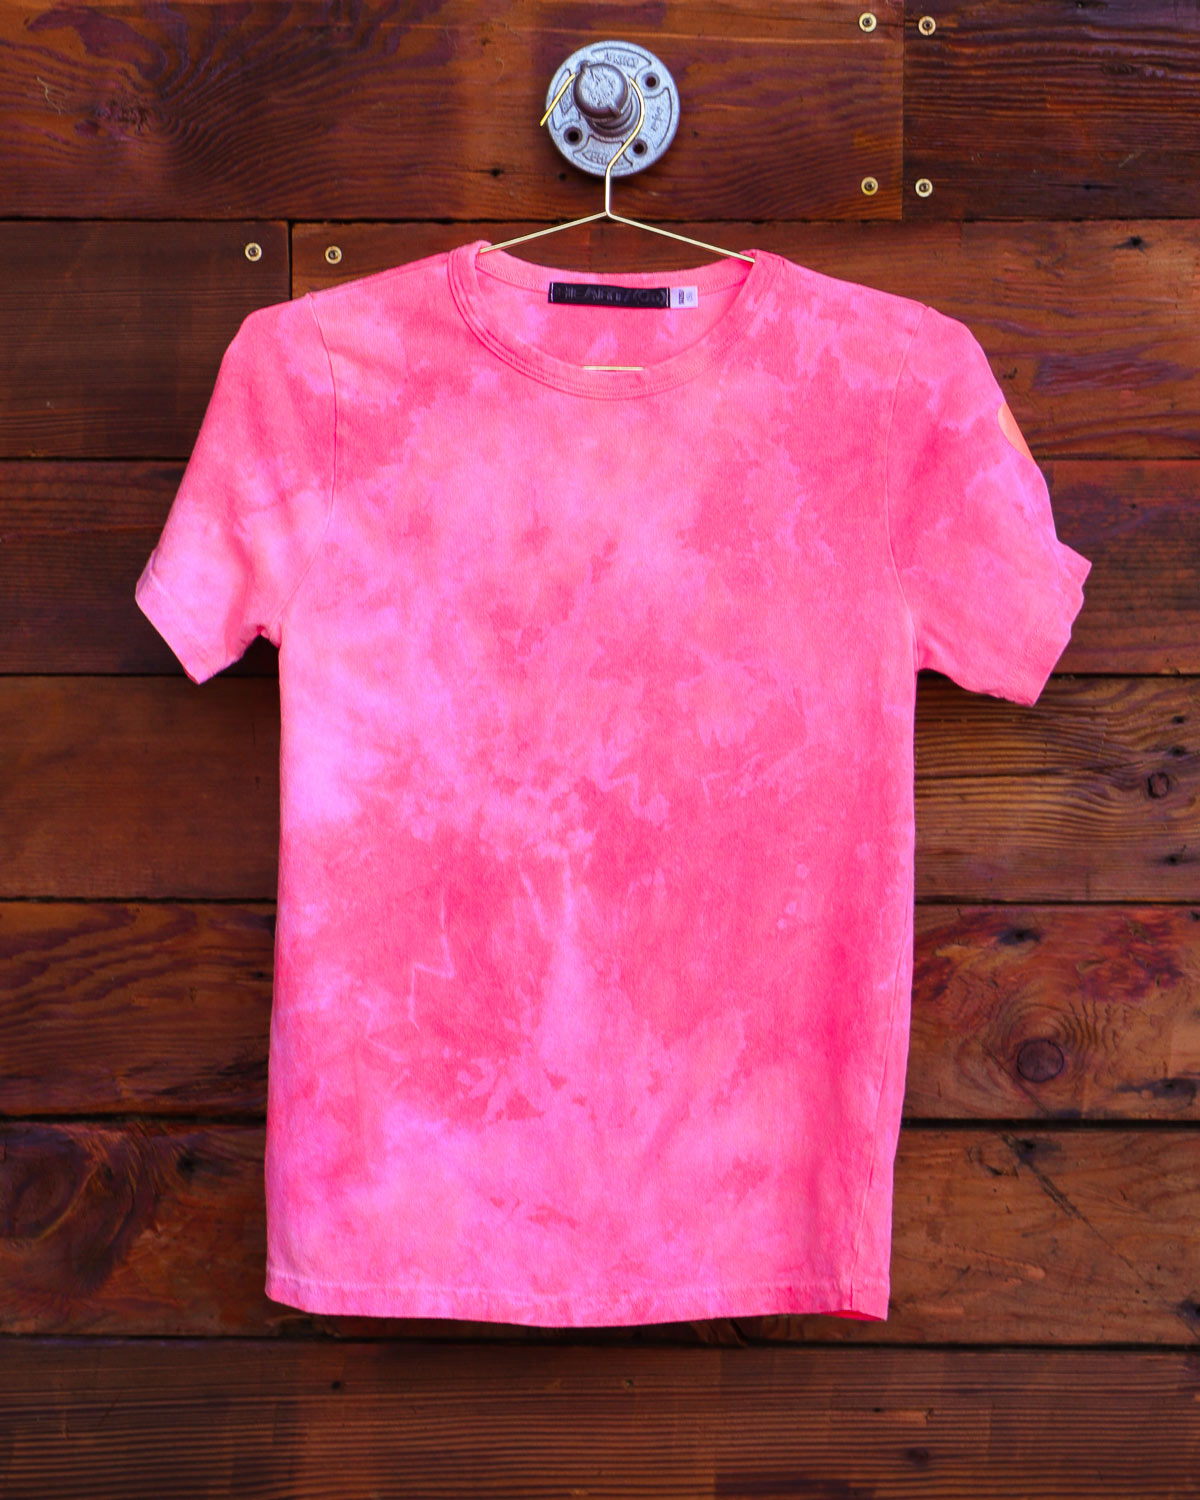 Bright salmon hand dyed tie dye shirt hanging on wood wall